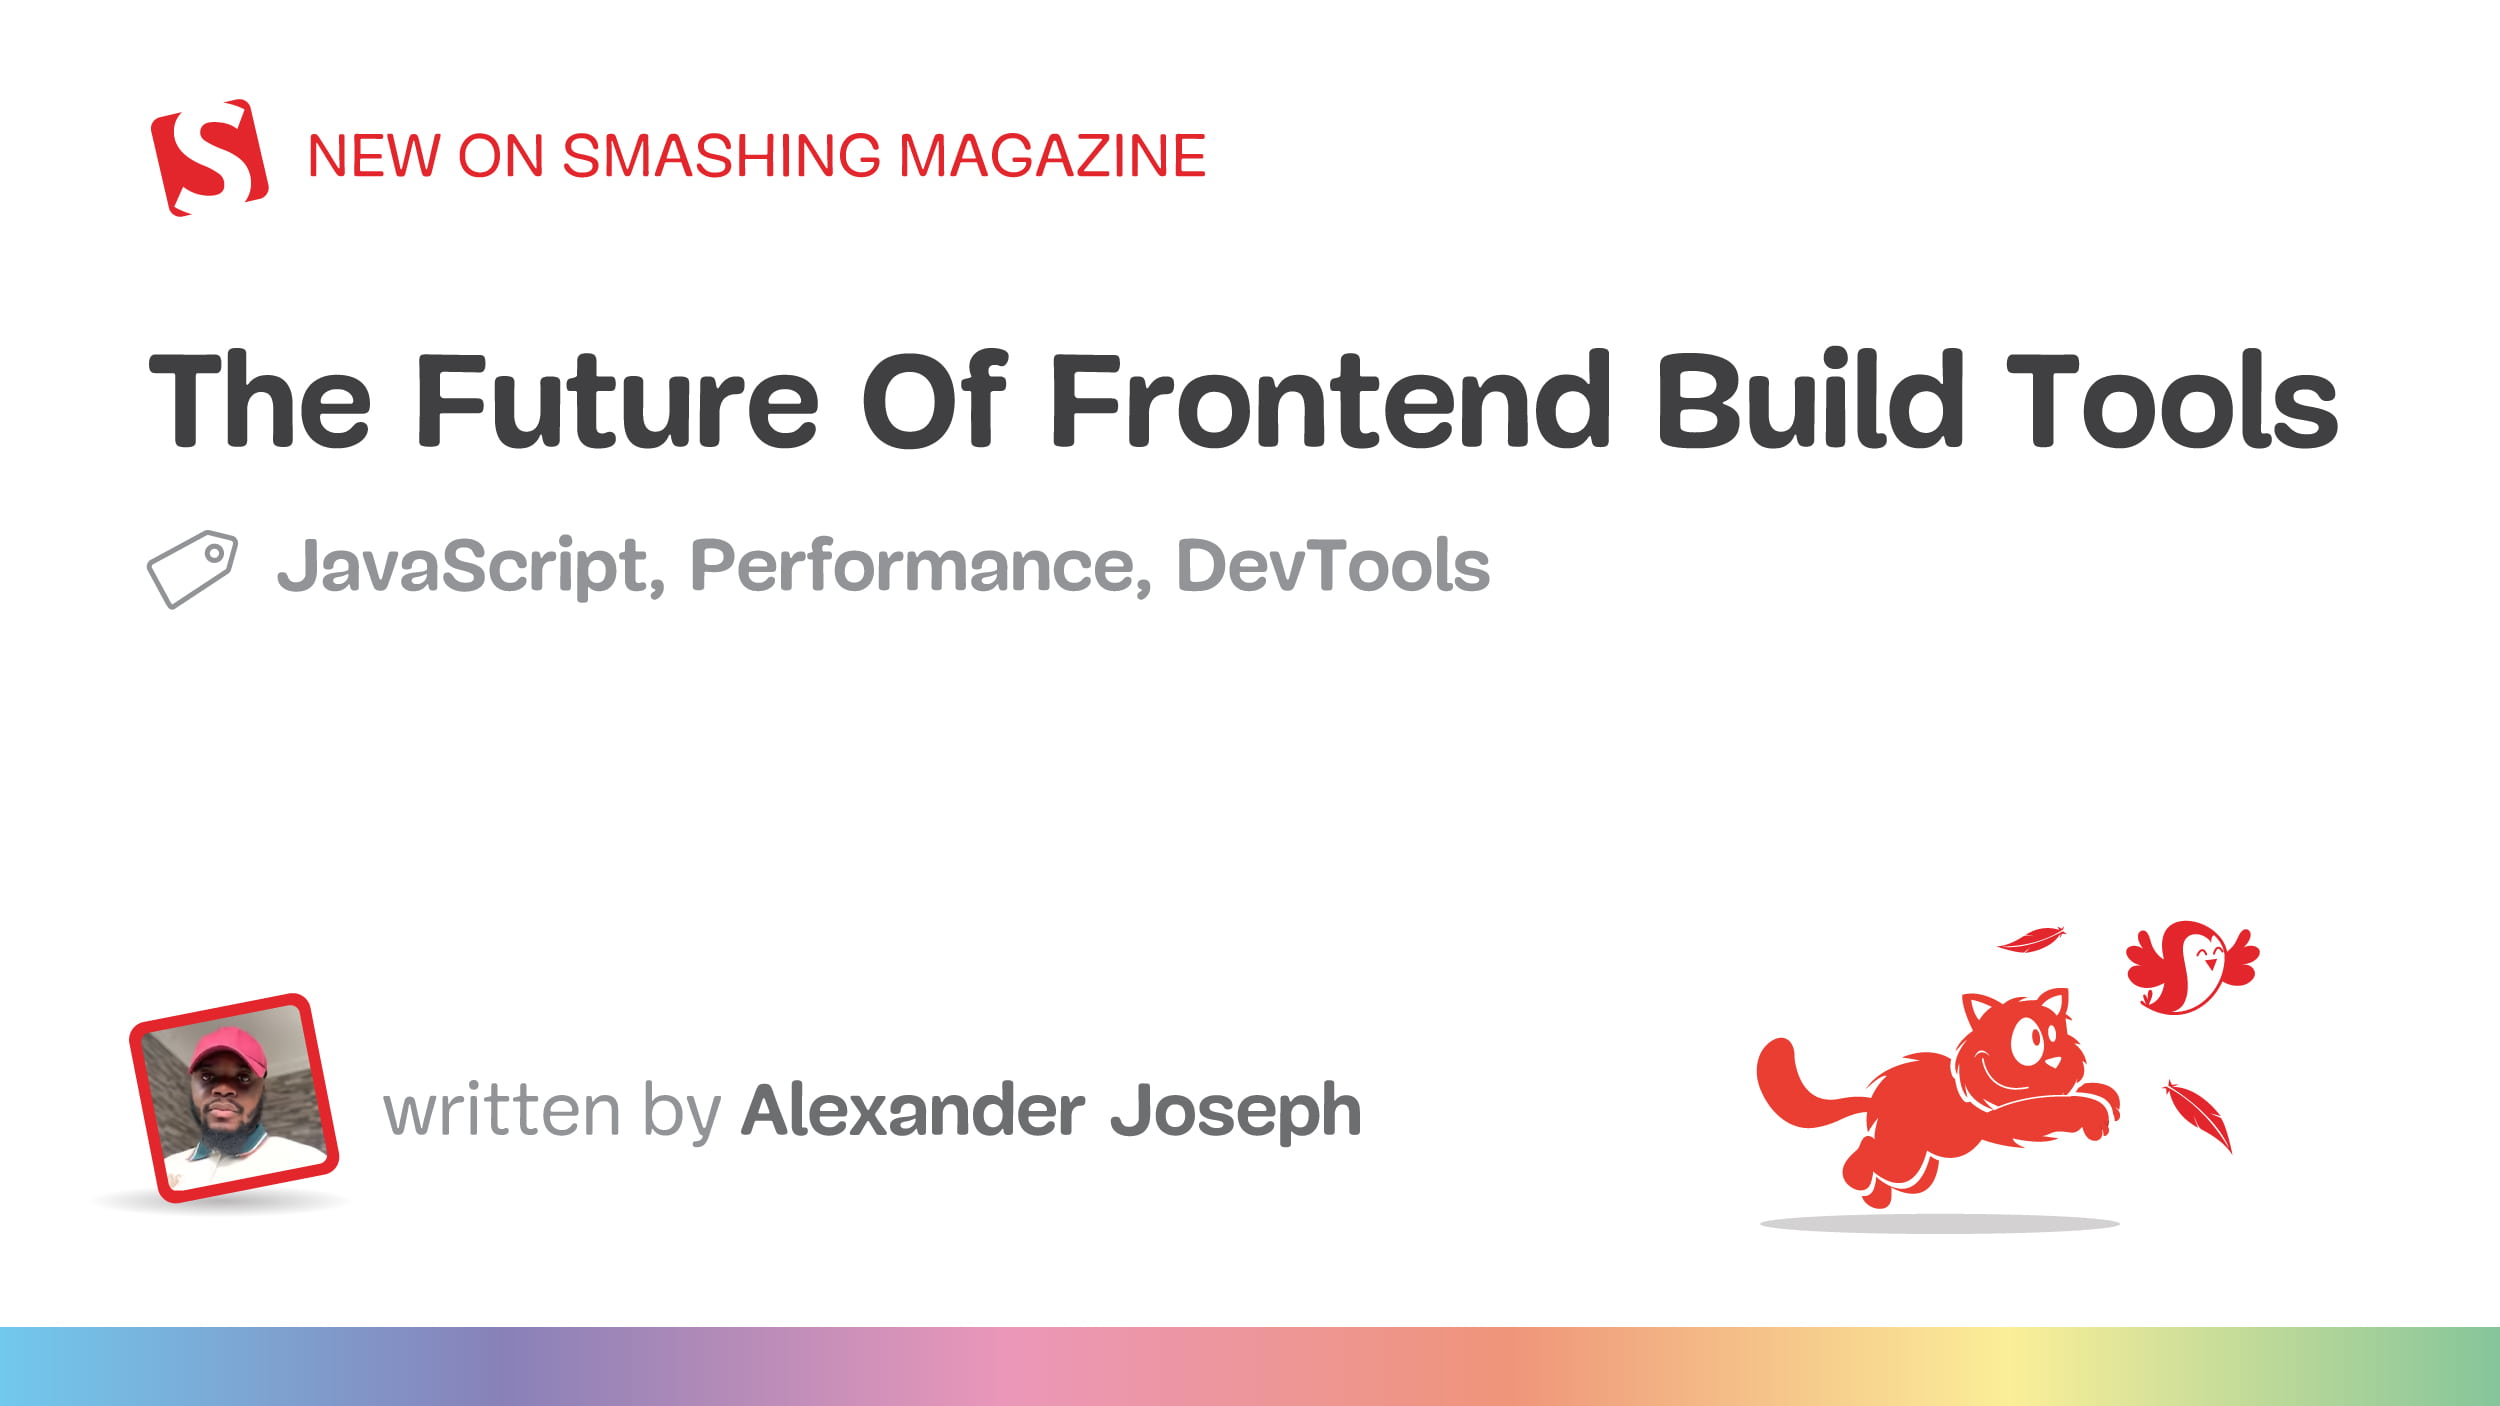 The Future Of Frontend Build Tools